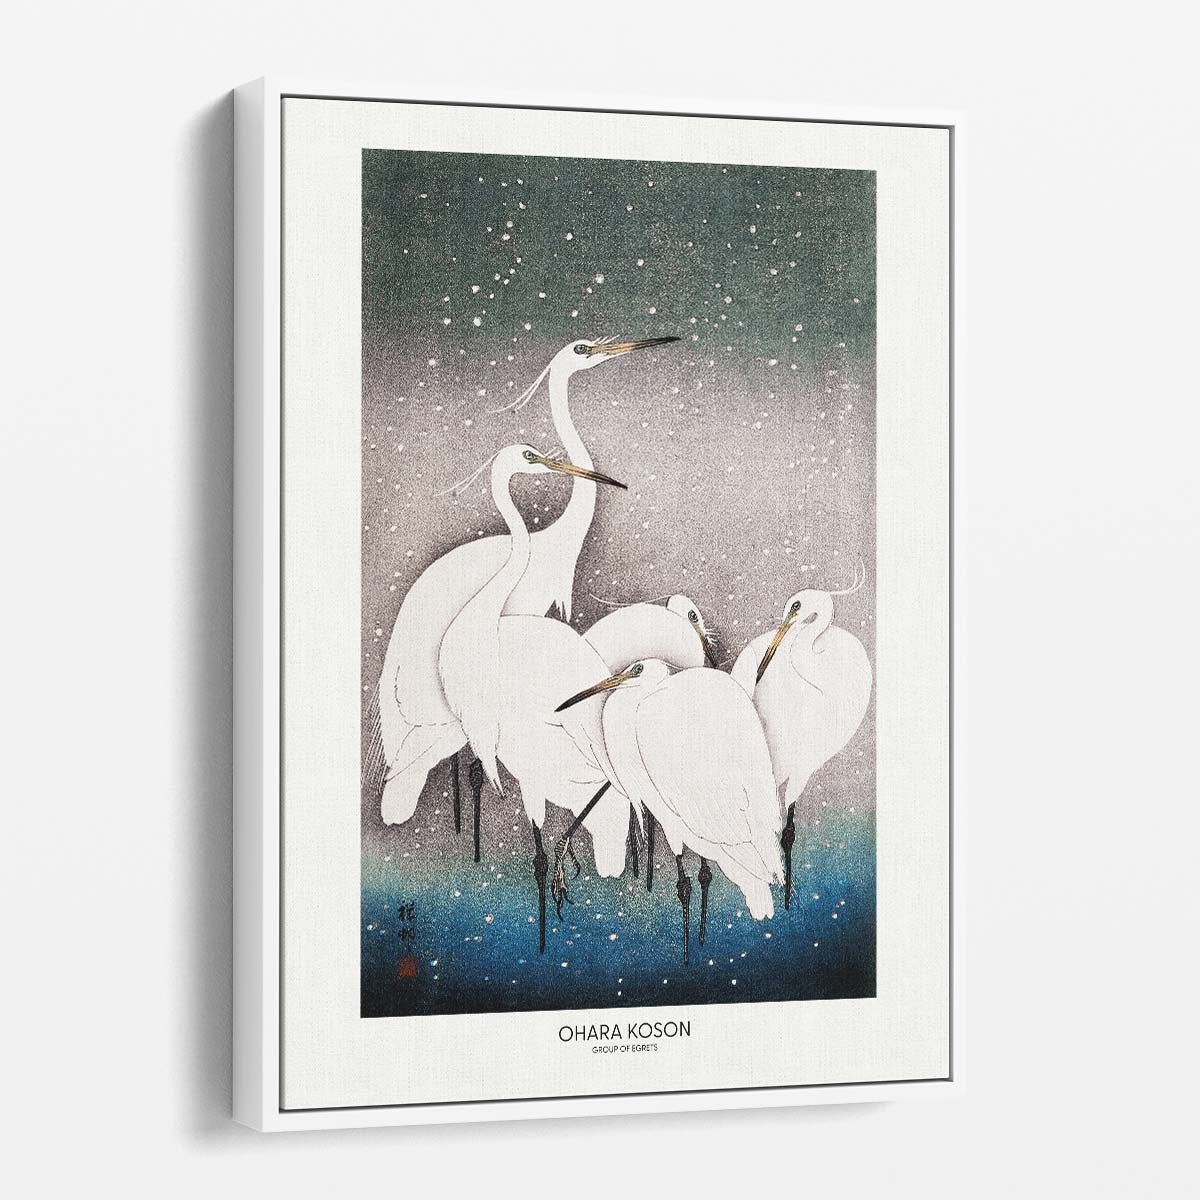 Vintage Japandi Egret Group Illustration by Ohara Koson by Luxuriance Designs, made in USA